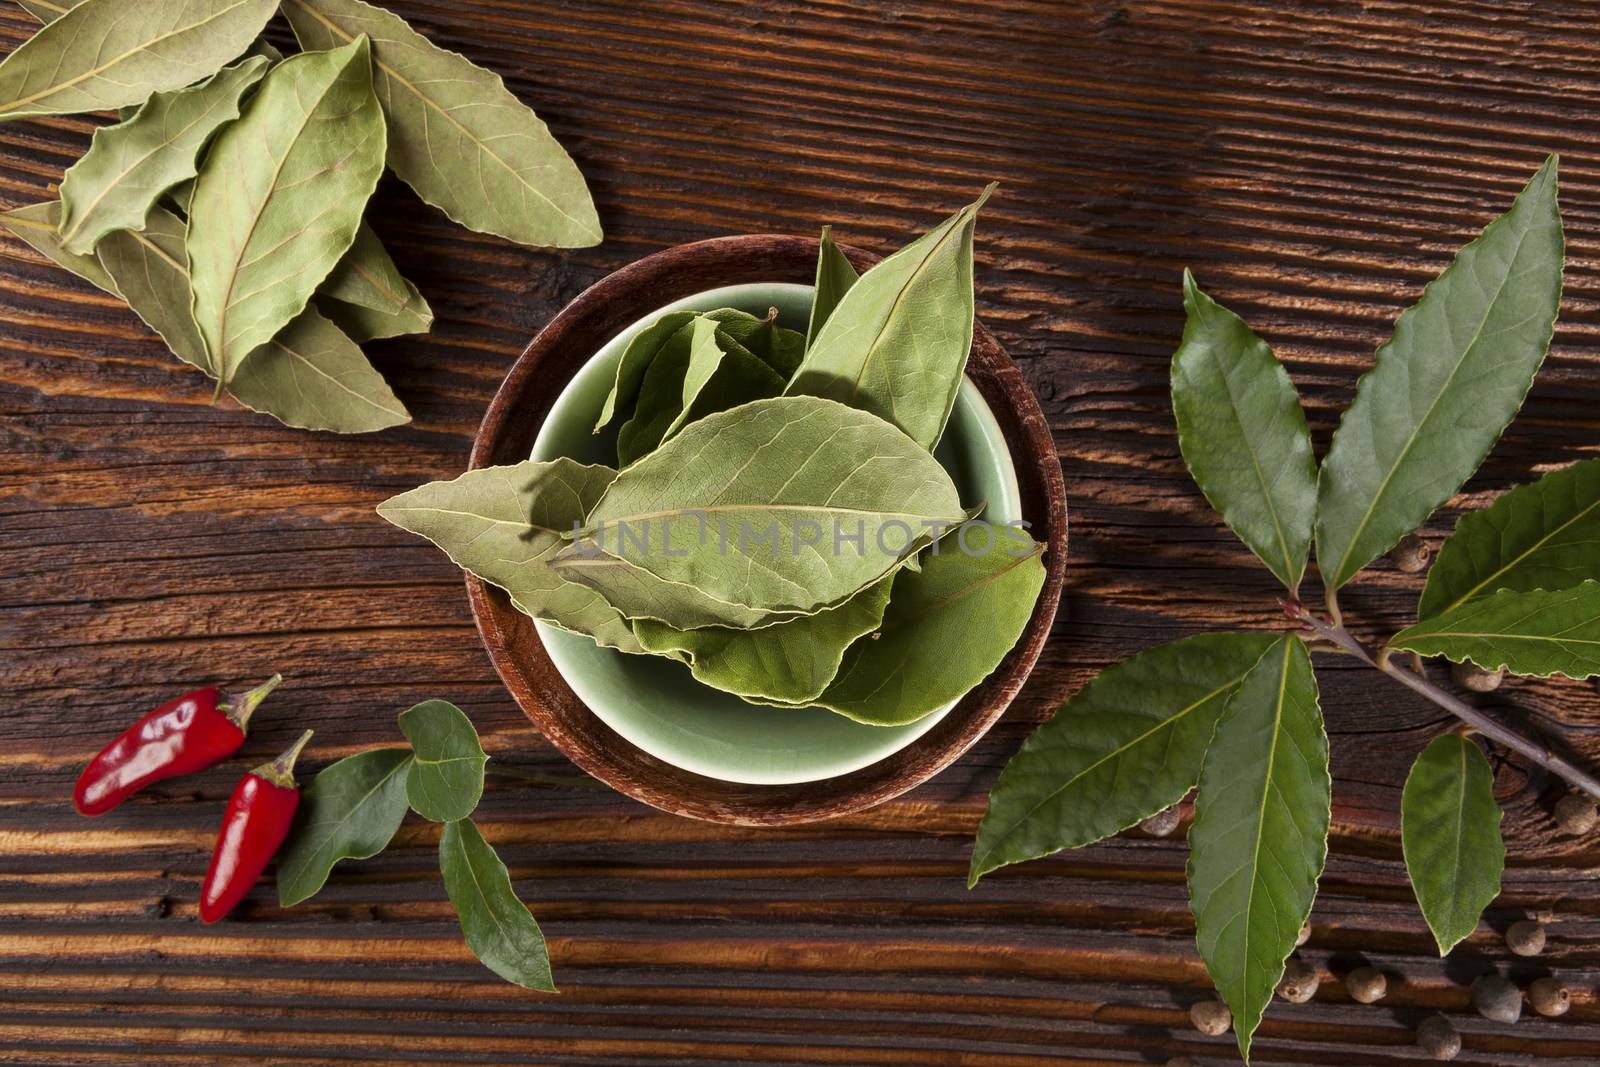 Bay leaves, traditional spice and condiment wooden background. Bay leaves, rosemary, chillies and black pepper on brown wooden table, top view.